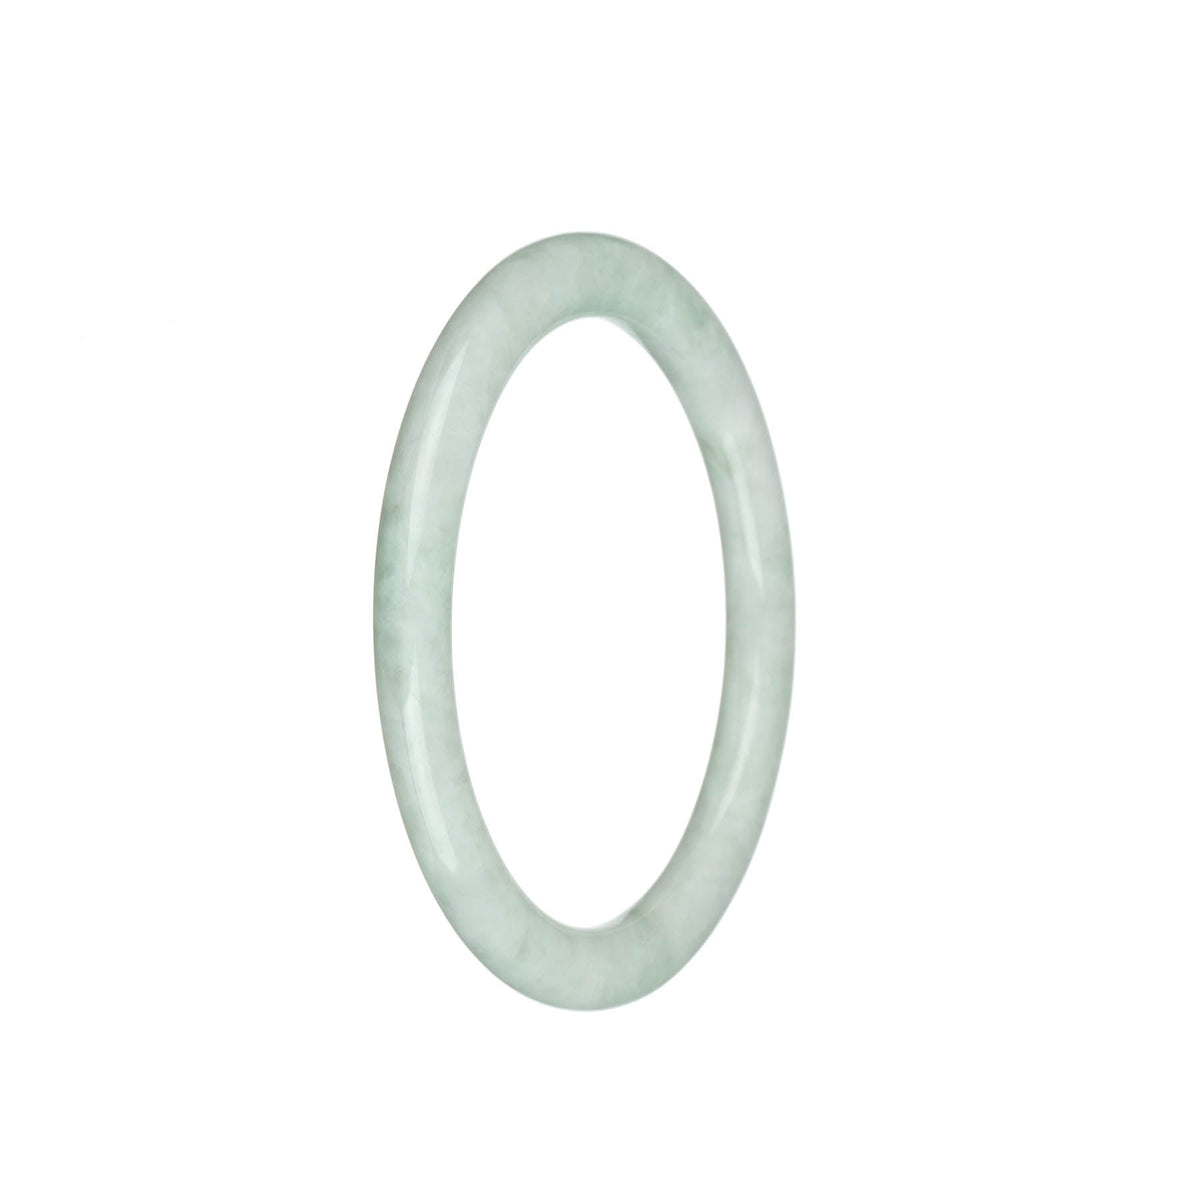 A close-up photo of a petite round jade bangle, made from high-quality pale green Burmese jade. The bangle has a smooth and polished surface, showcasing its natural beauty.